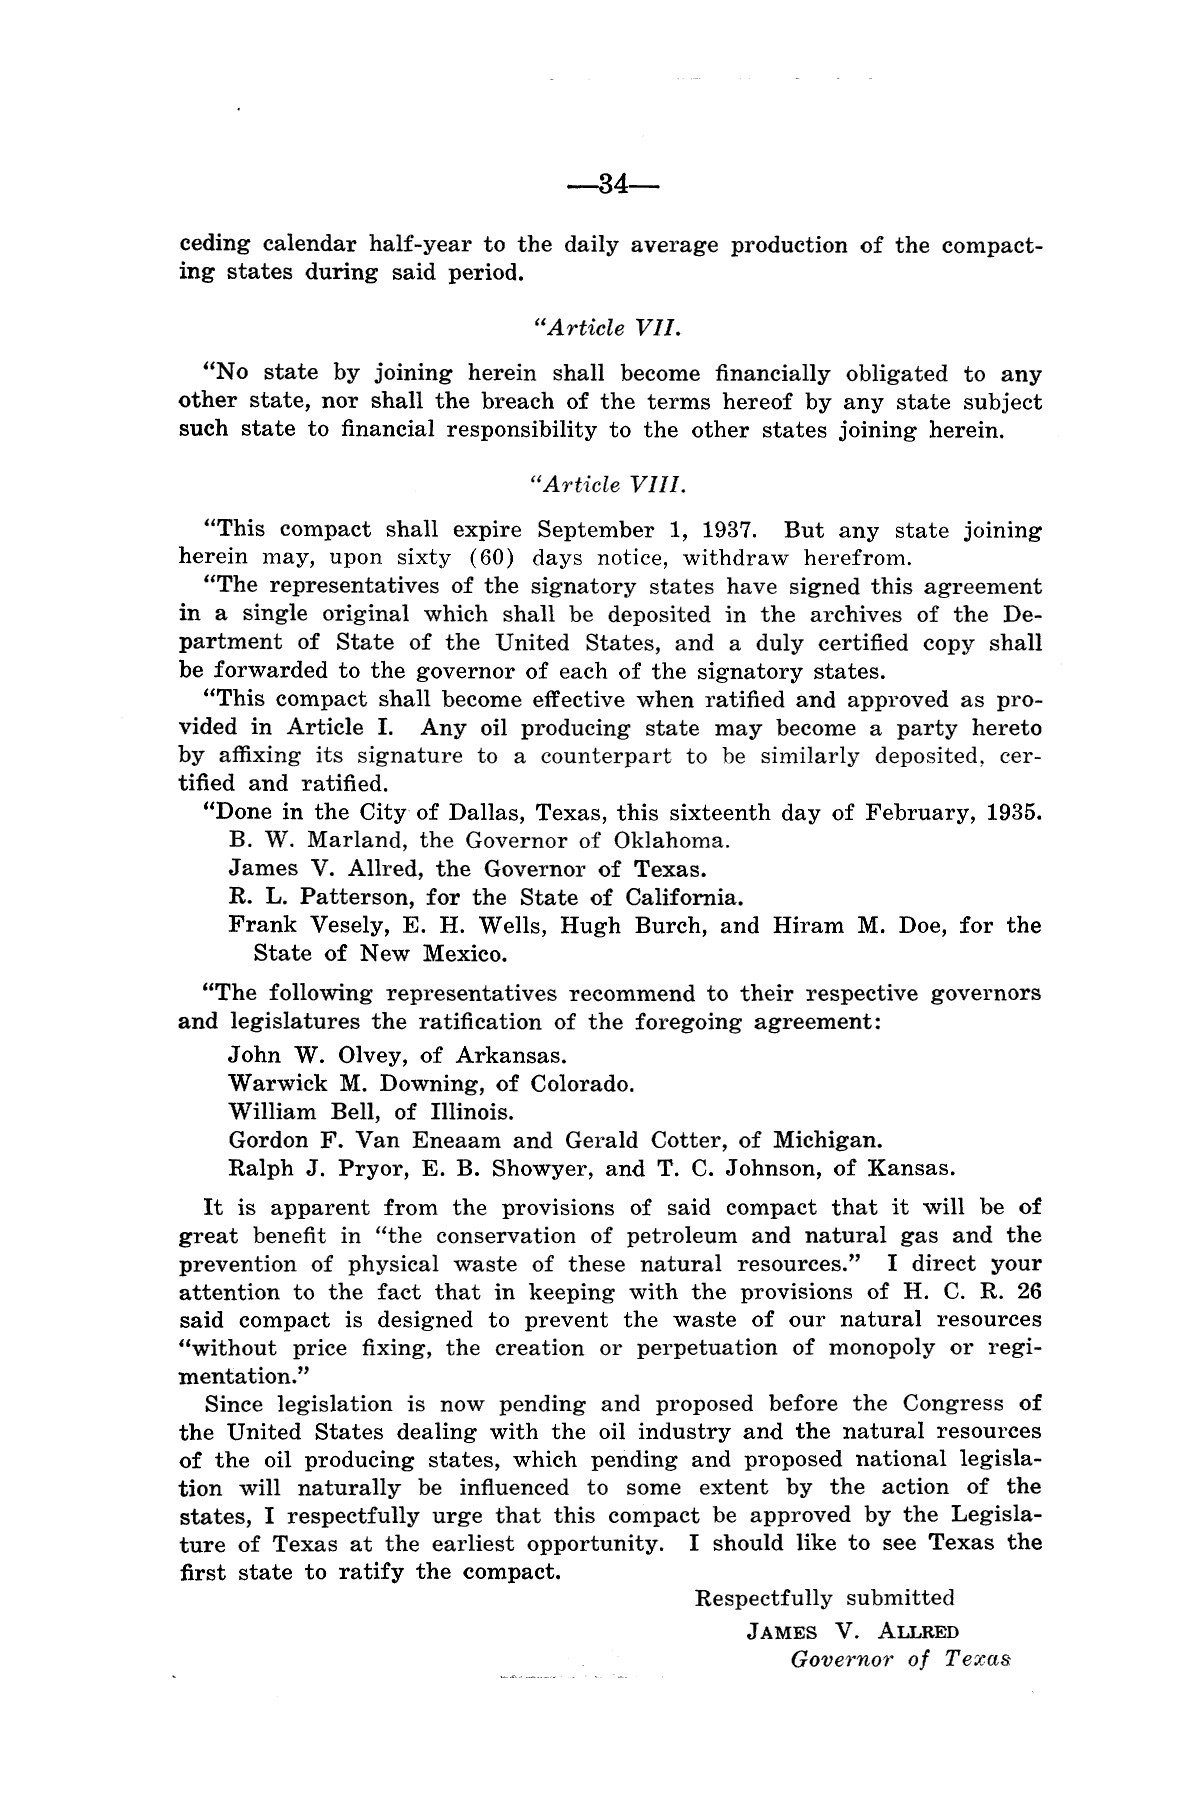 Legislative Messages of Hon. James V. Allred, Governor of Texas 1935-1939
                                                
                                                    [Sequence #]: 33 of 263
                                                